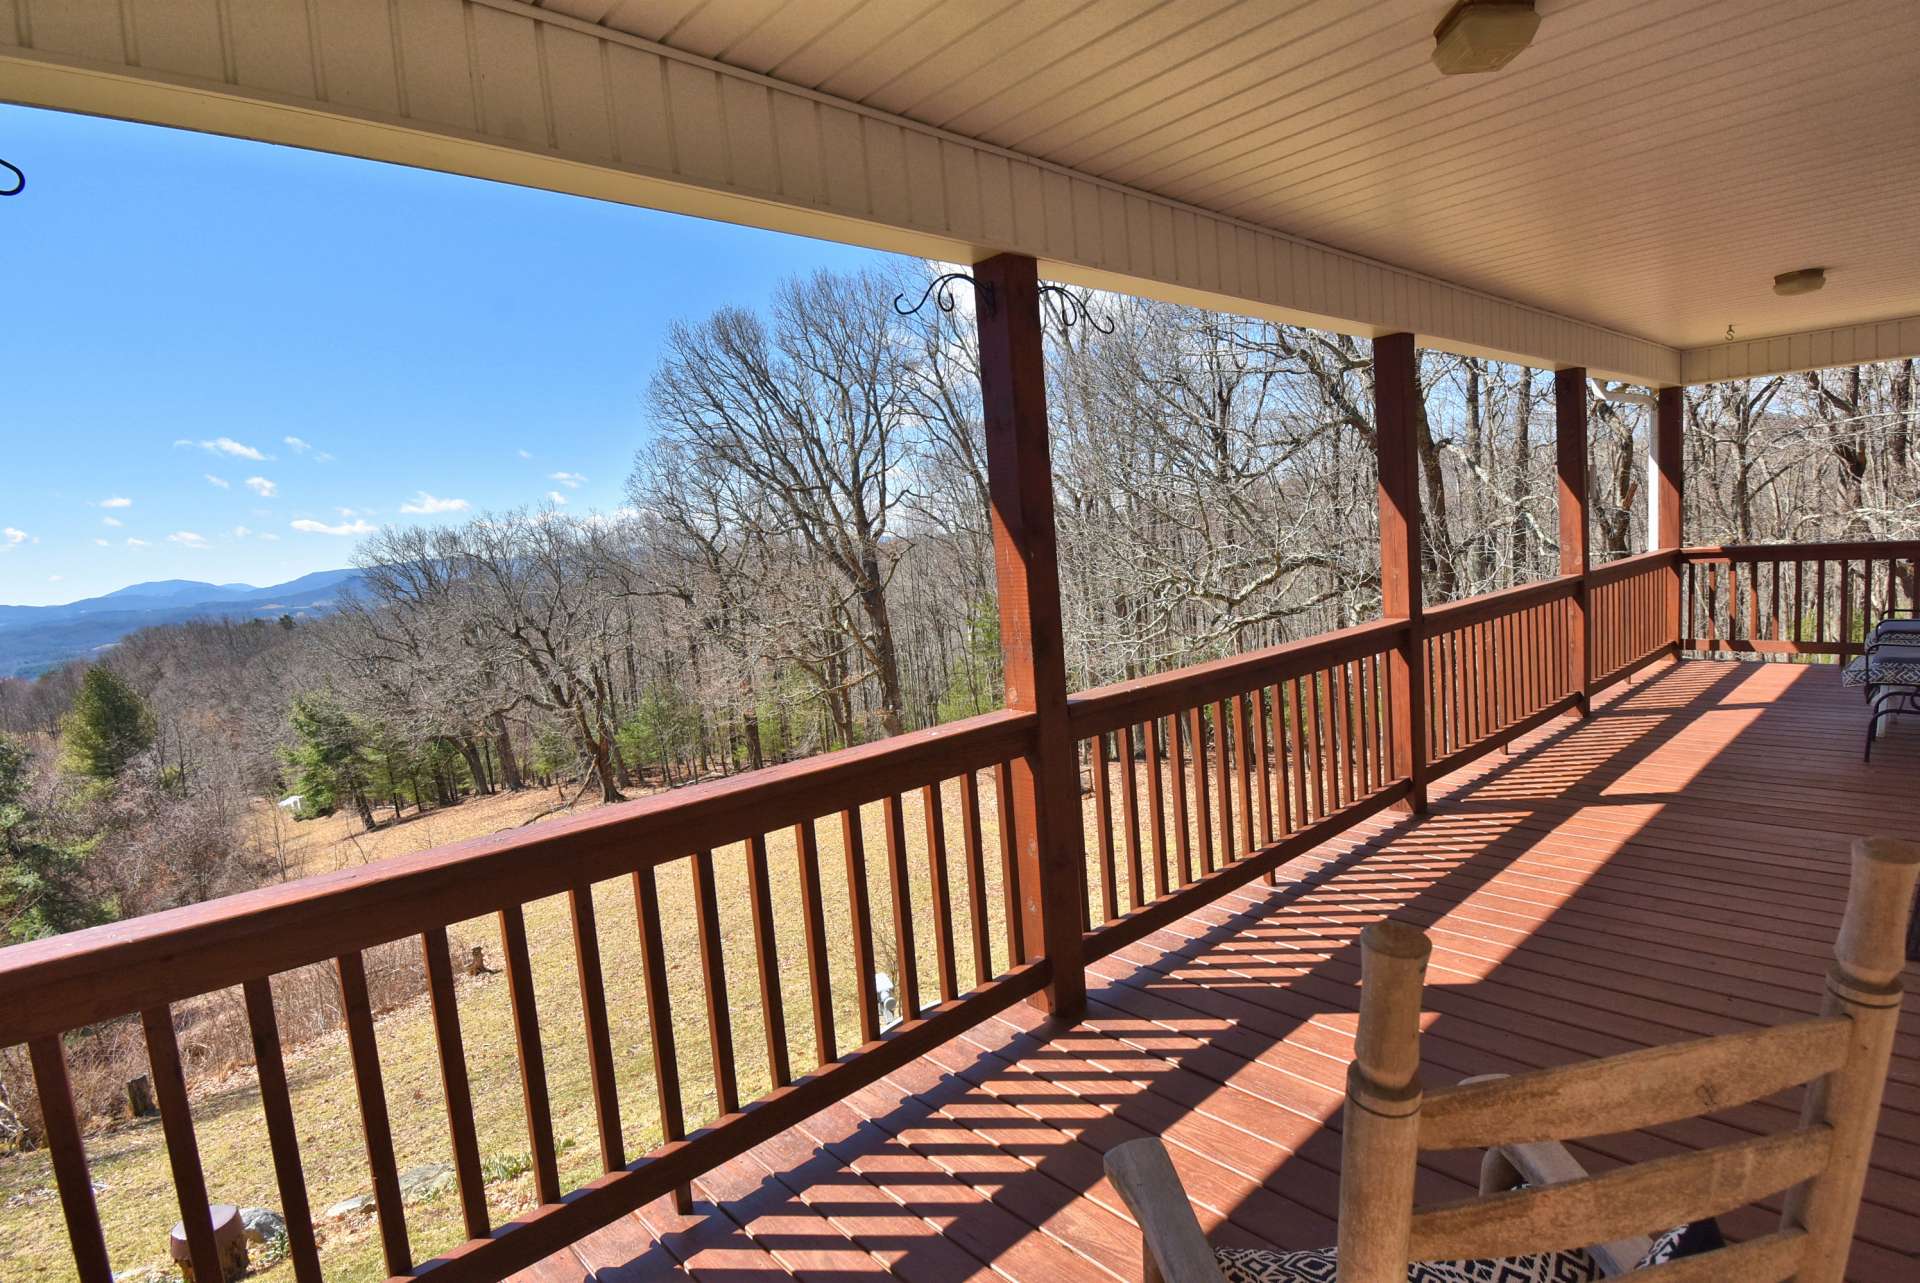 A full length covered deck is the ideal space to enjoy a tall glass of iced tea while enjoying the views, mountain scenery, and the sounds of Nature.